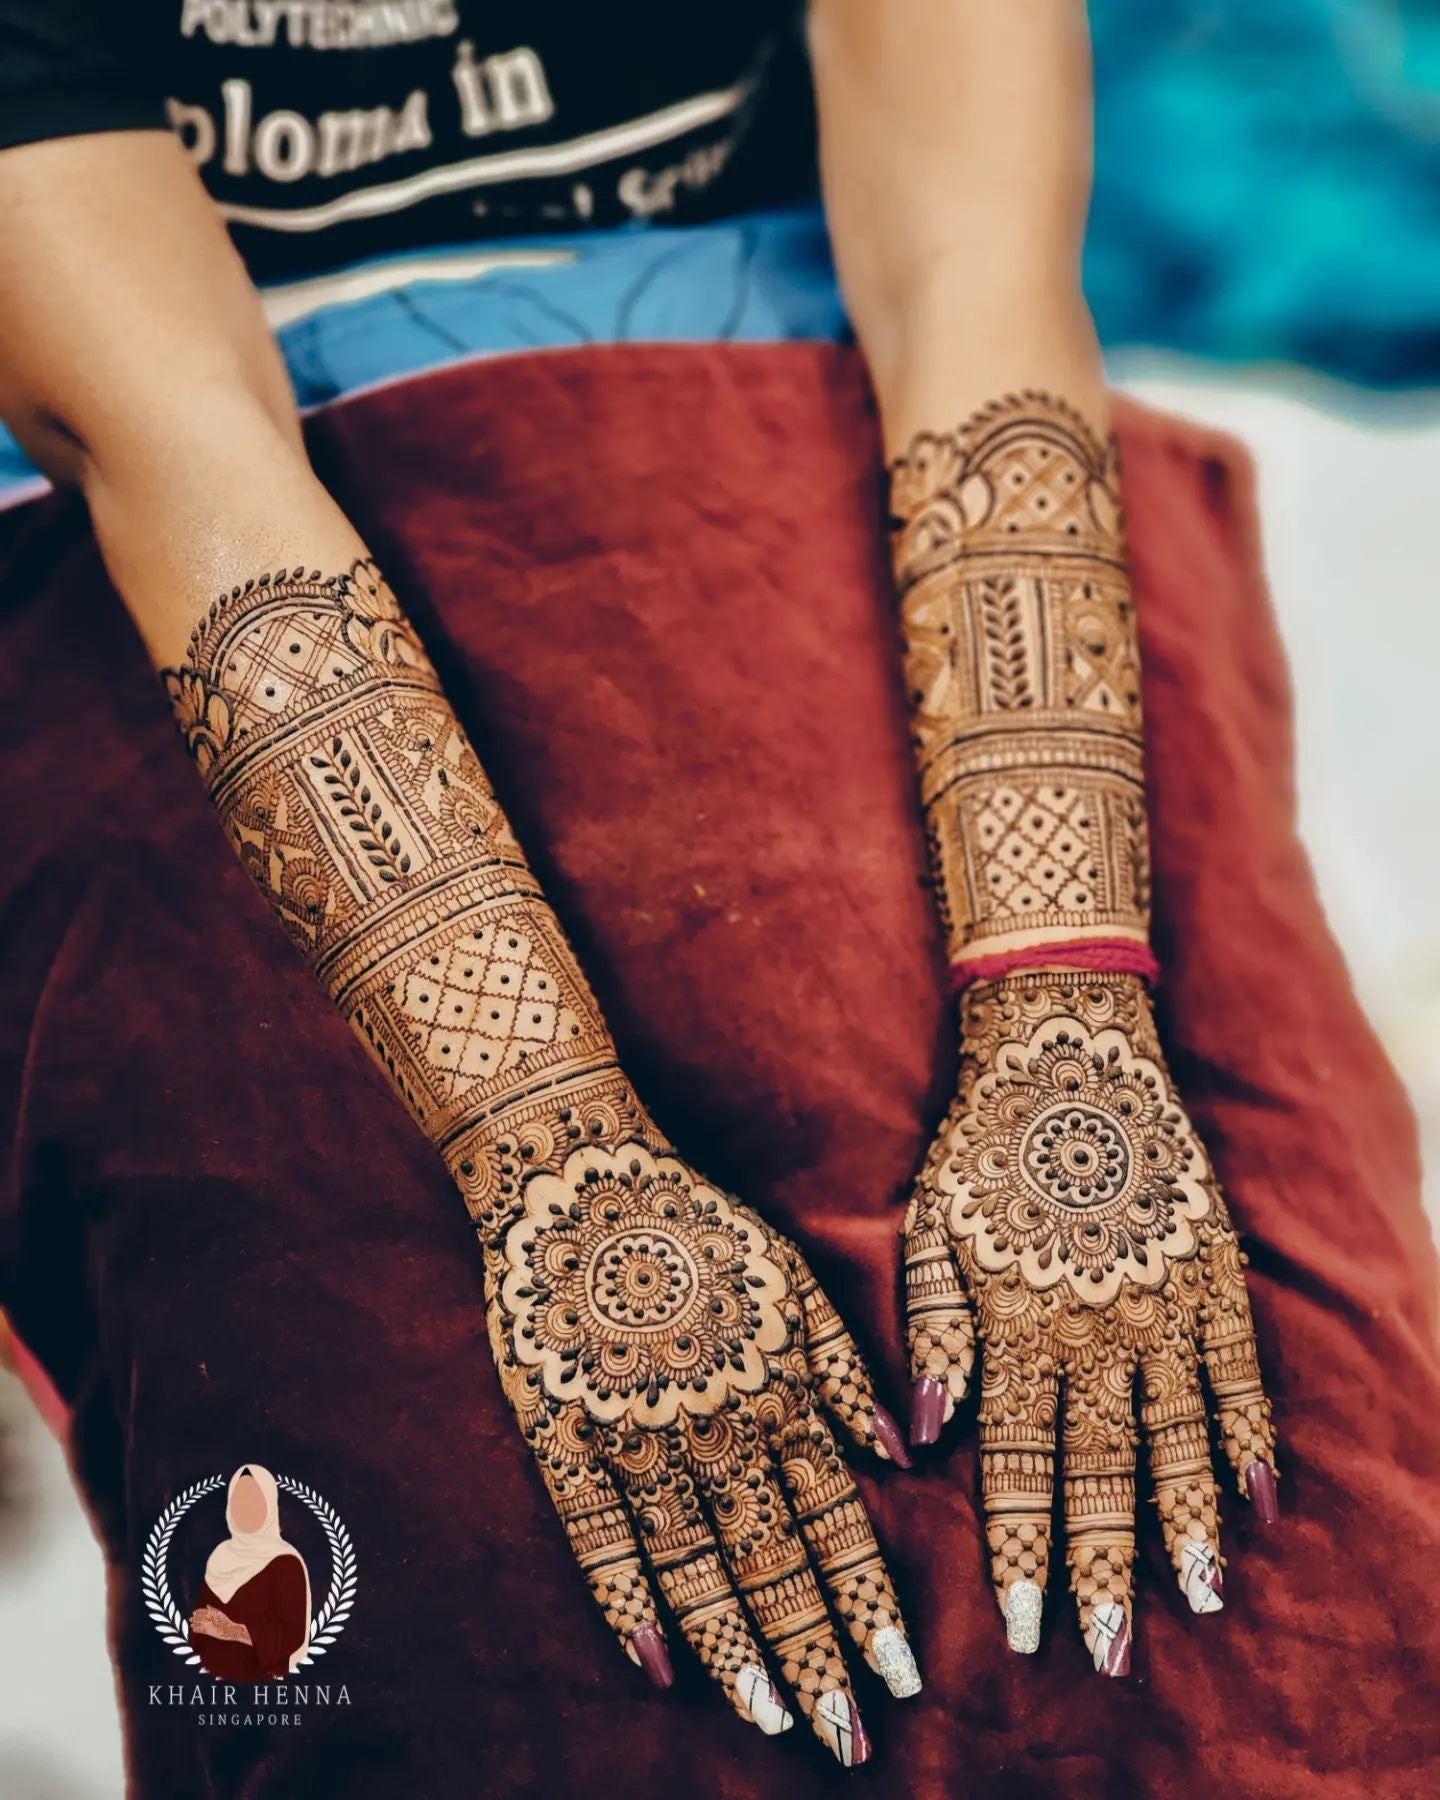 Arm (Hands & Feet) + 2 hours Henna Party $820